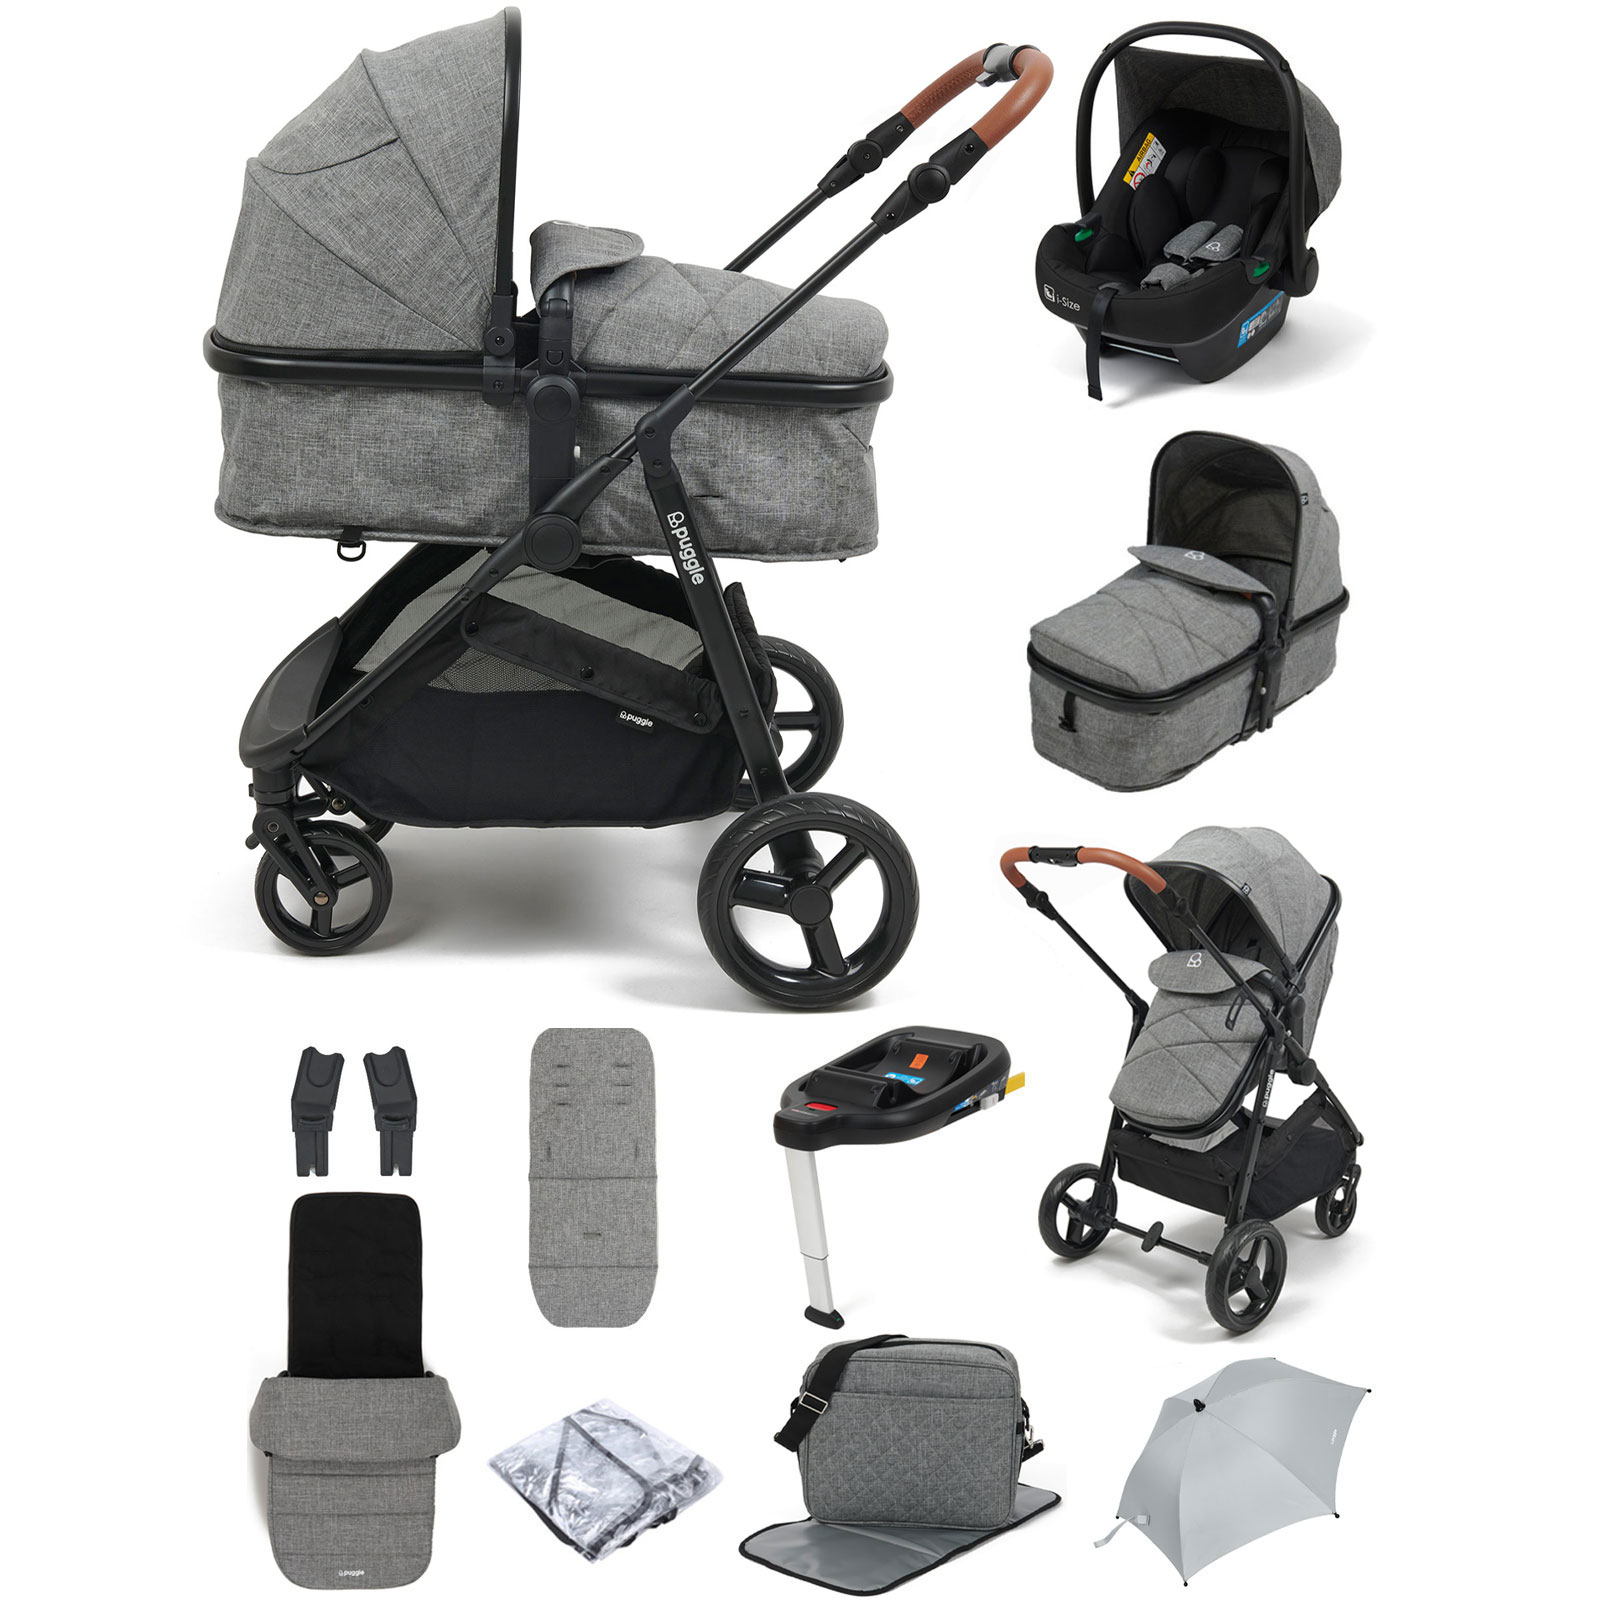 Puggle Monaco XT 2in1 i-Size Travel System with Base, Footmuff, Changing Bag & Parasol - Graphite Grey